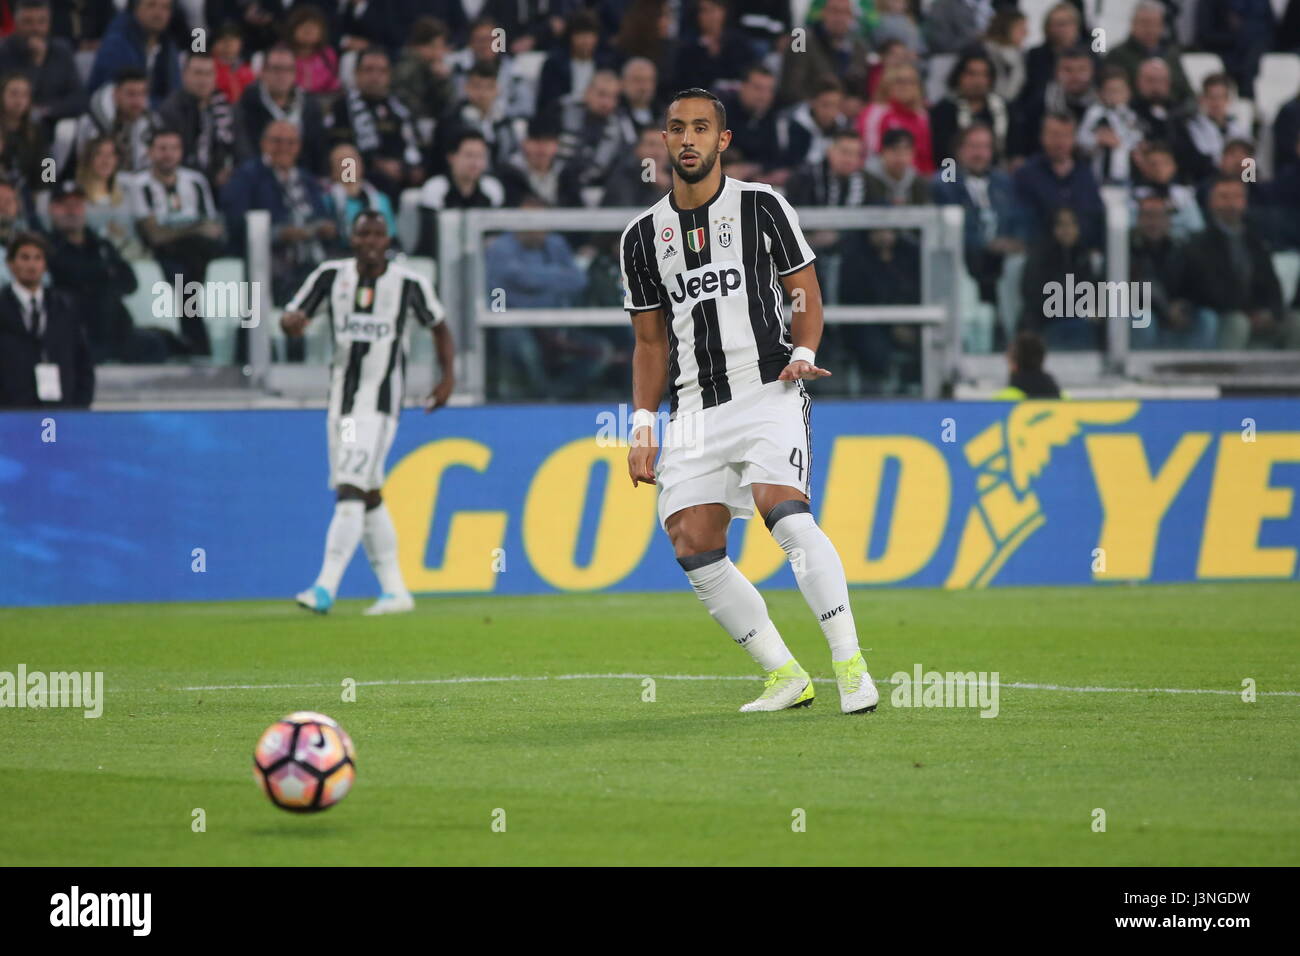 Turin, Italy. 6th May, 2017. Mehdi Benatia (Juventus FC) in action during the Serie A football match between Juventus FC and Torino FC  at Juventus Stadium on may 06, 2017 in Turin, Italy. Credit: Massimiliano Ferraro/Alamy Live News Stock Photo